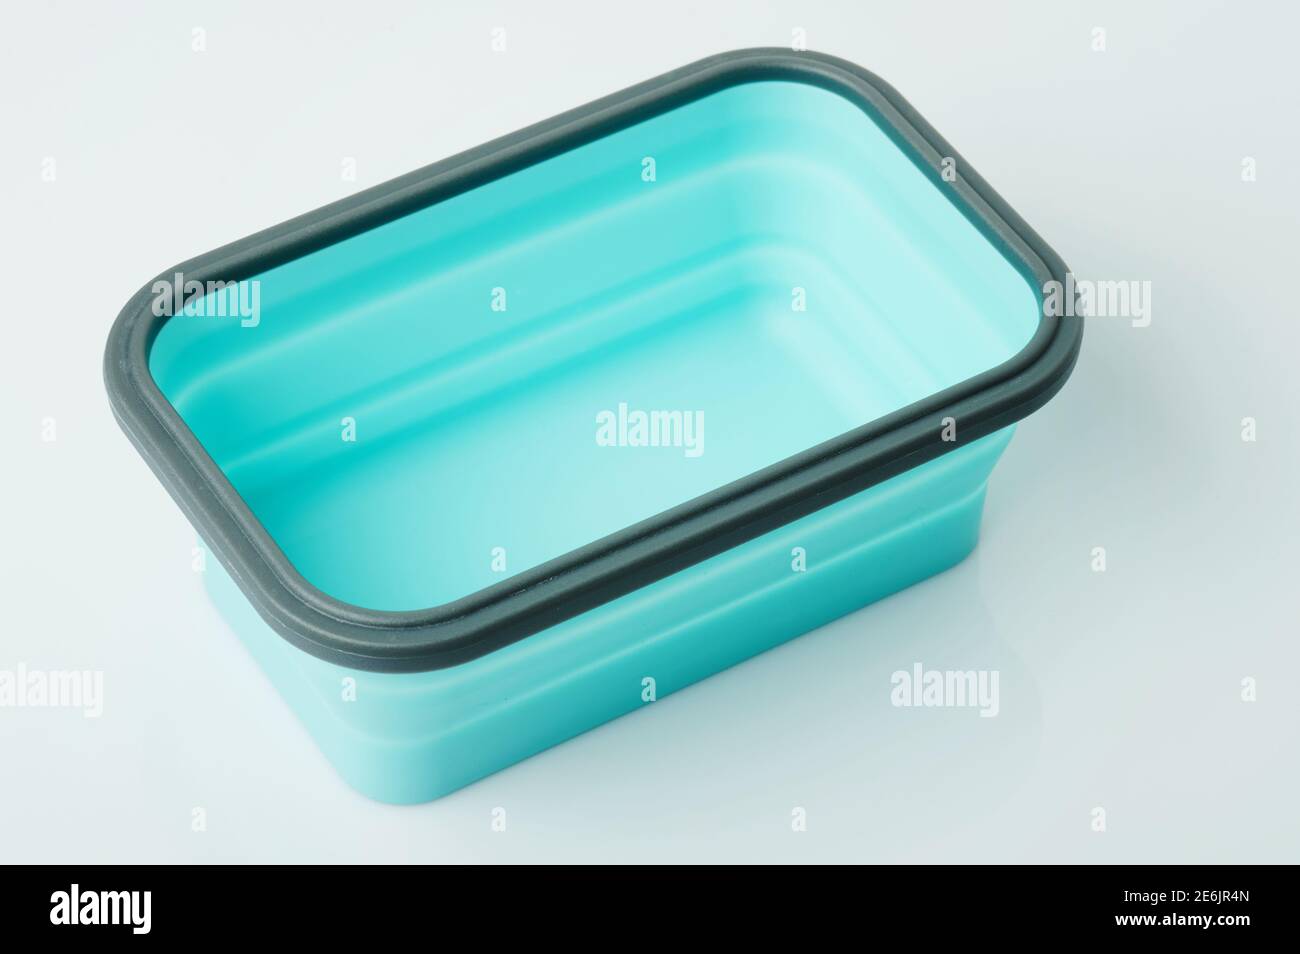 Perspective view of plastic lunch box isolated on white studio background Stock Photo